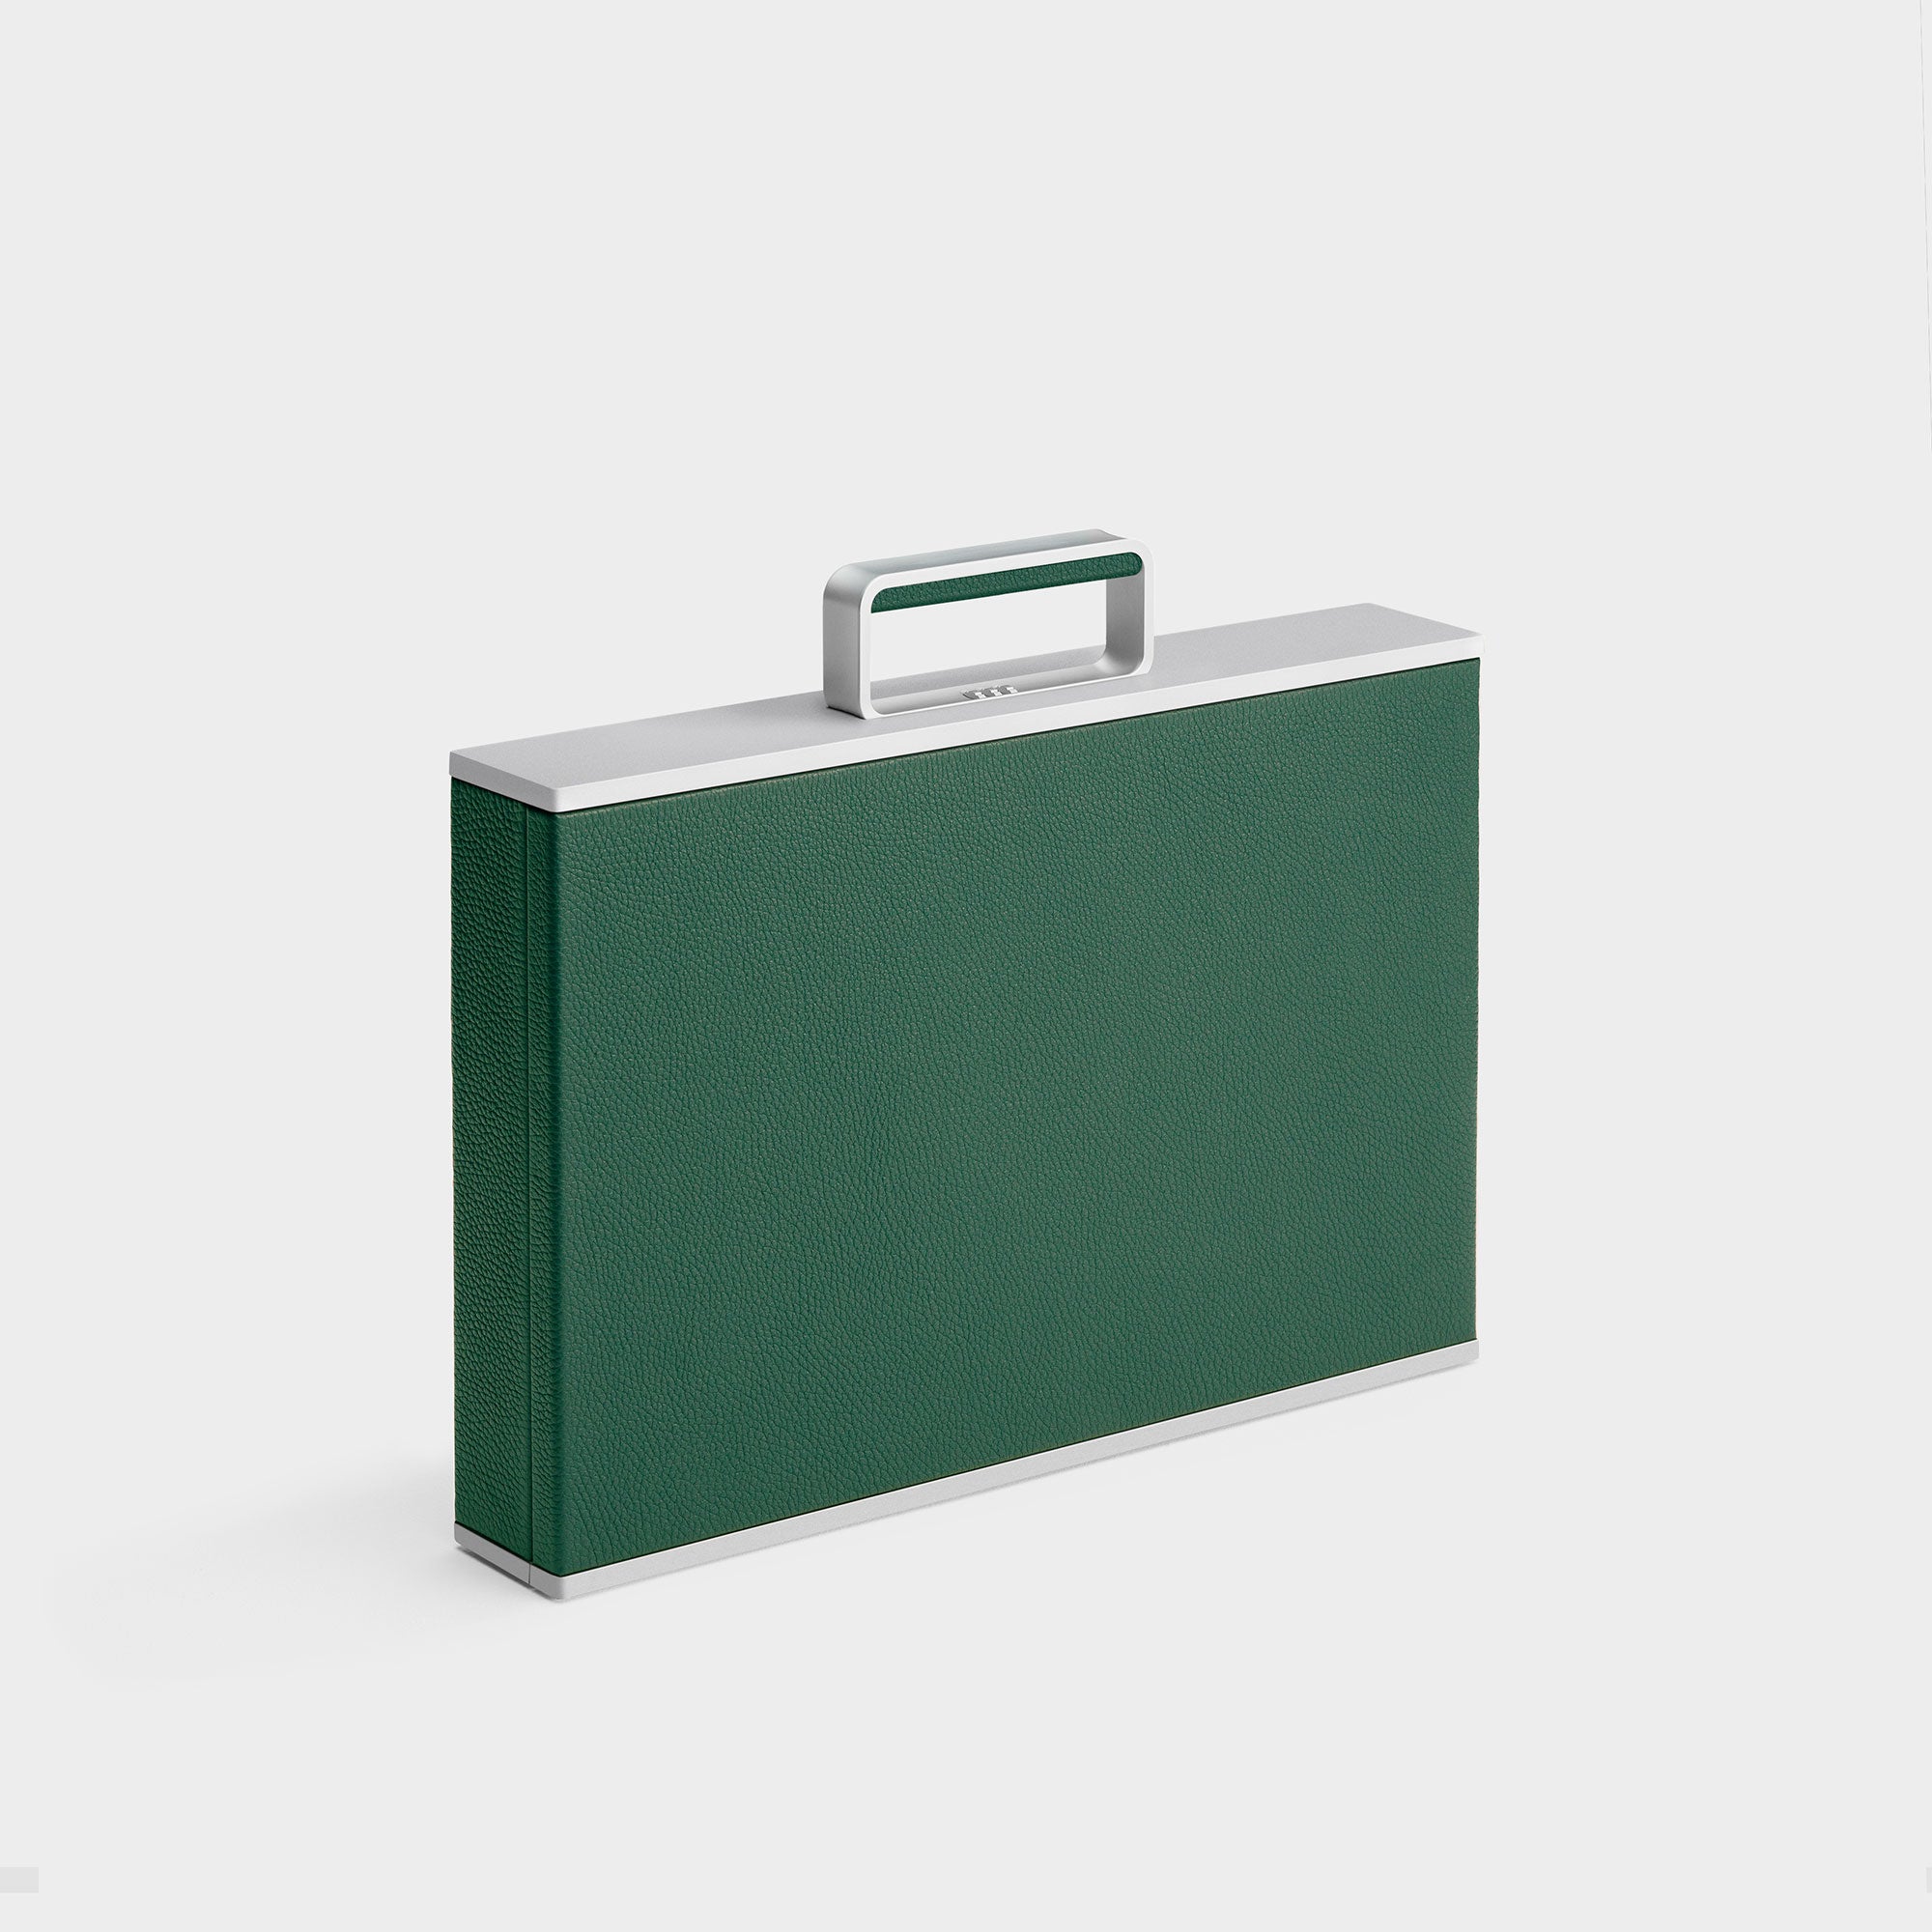 Charles Simon Mackenzie watch briefcase in emerald green leather with matching leather handle detail